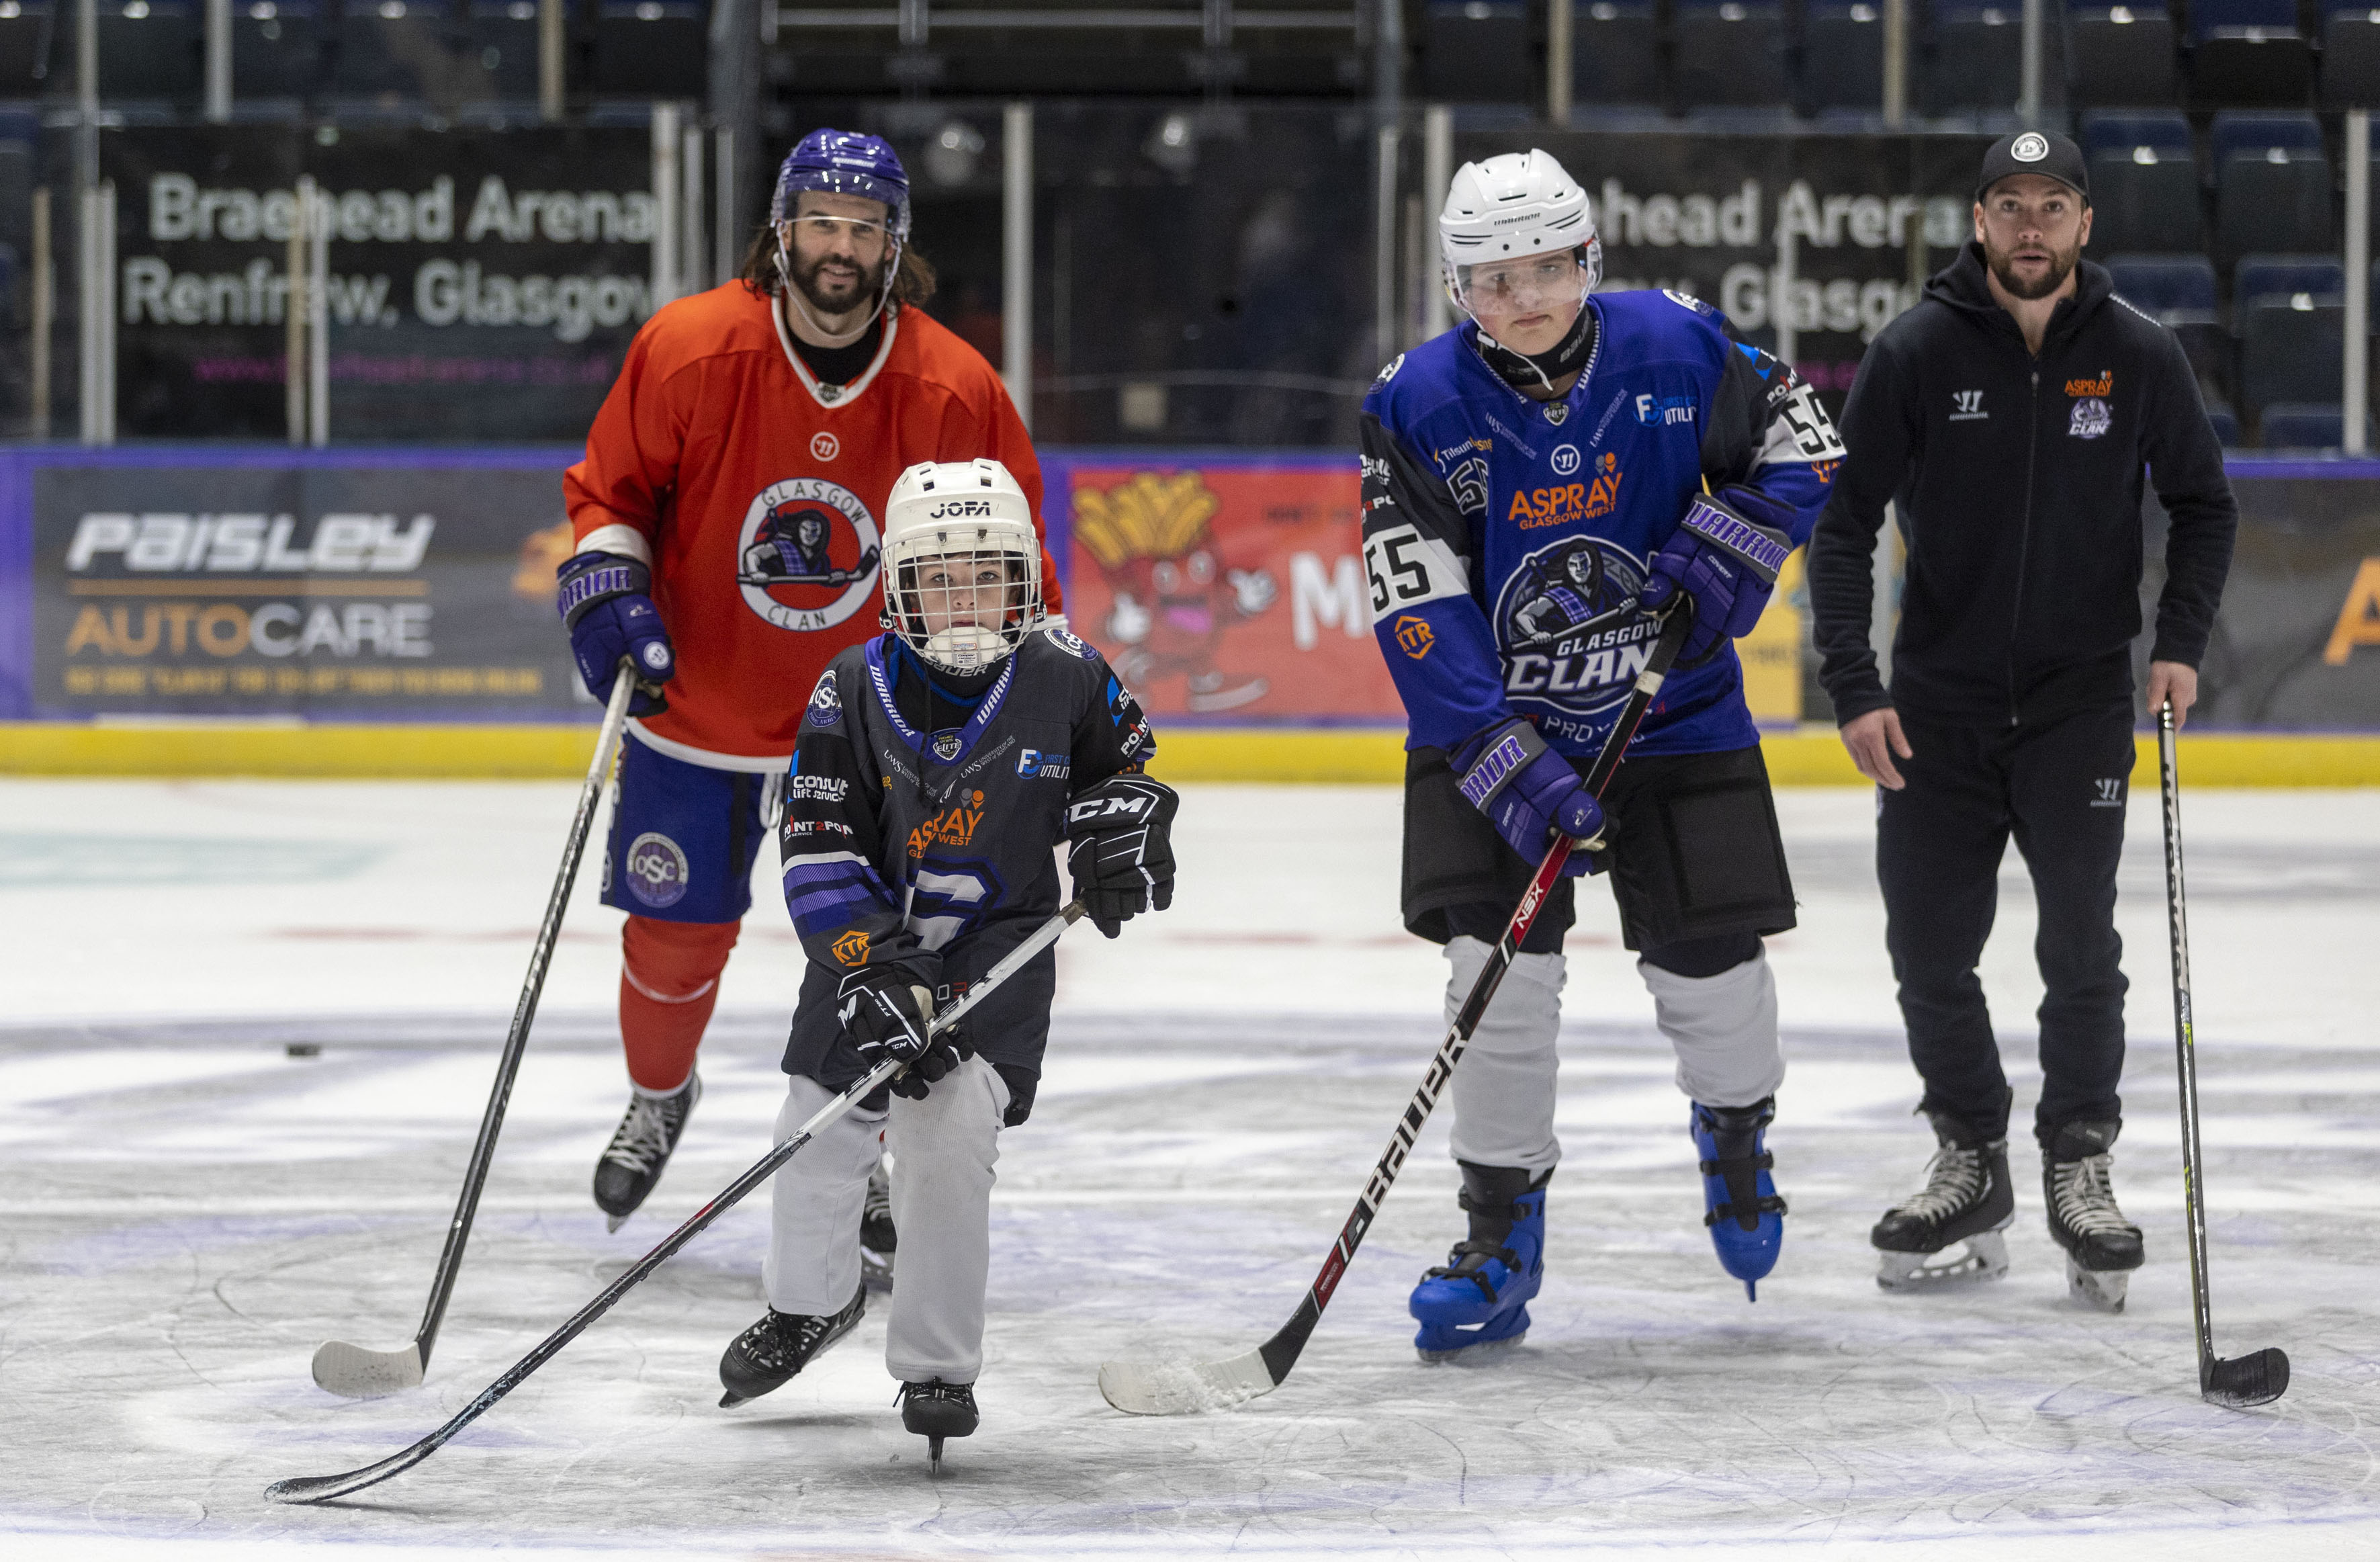 Watch as Glasgow's ice hockey team skate out dressed as skeletons - Glasgow  Live